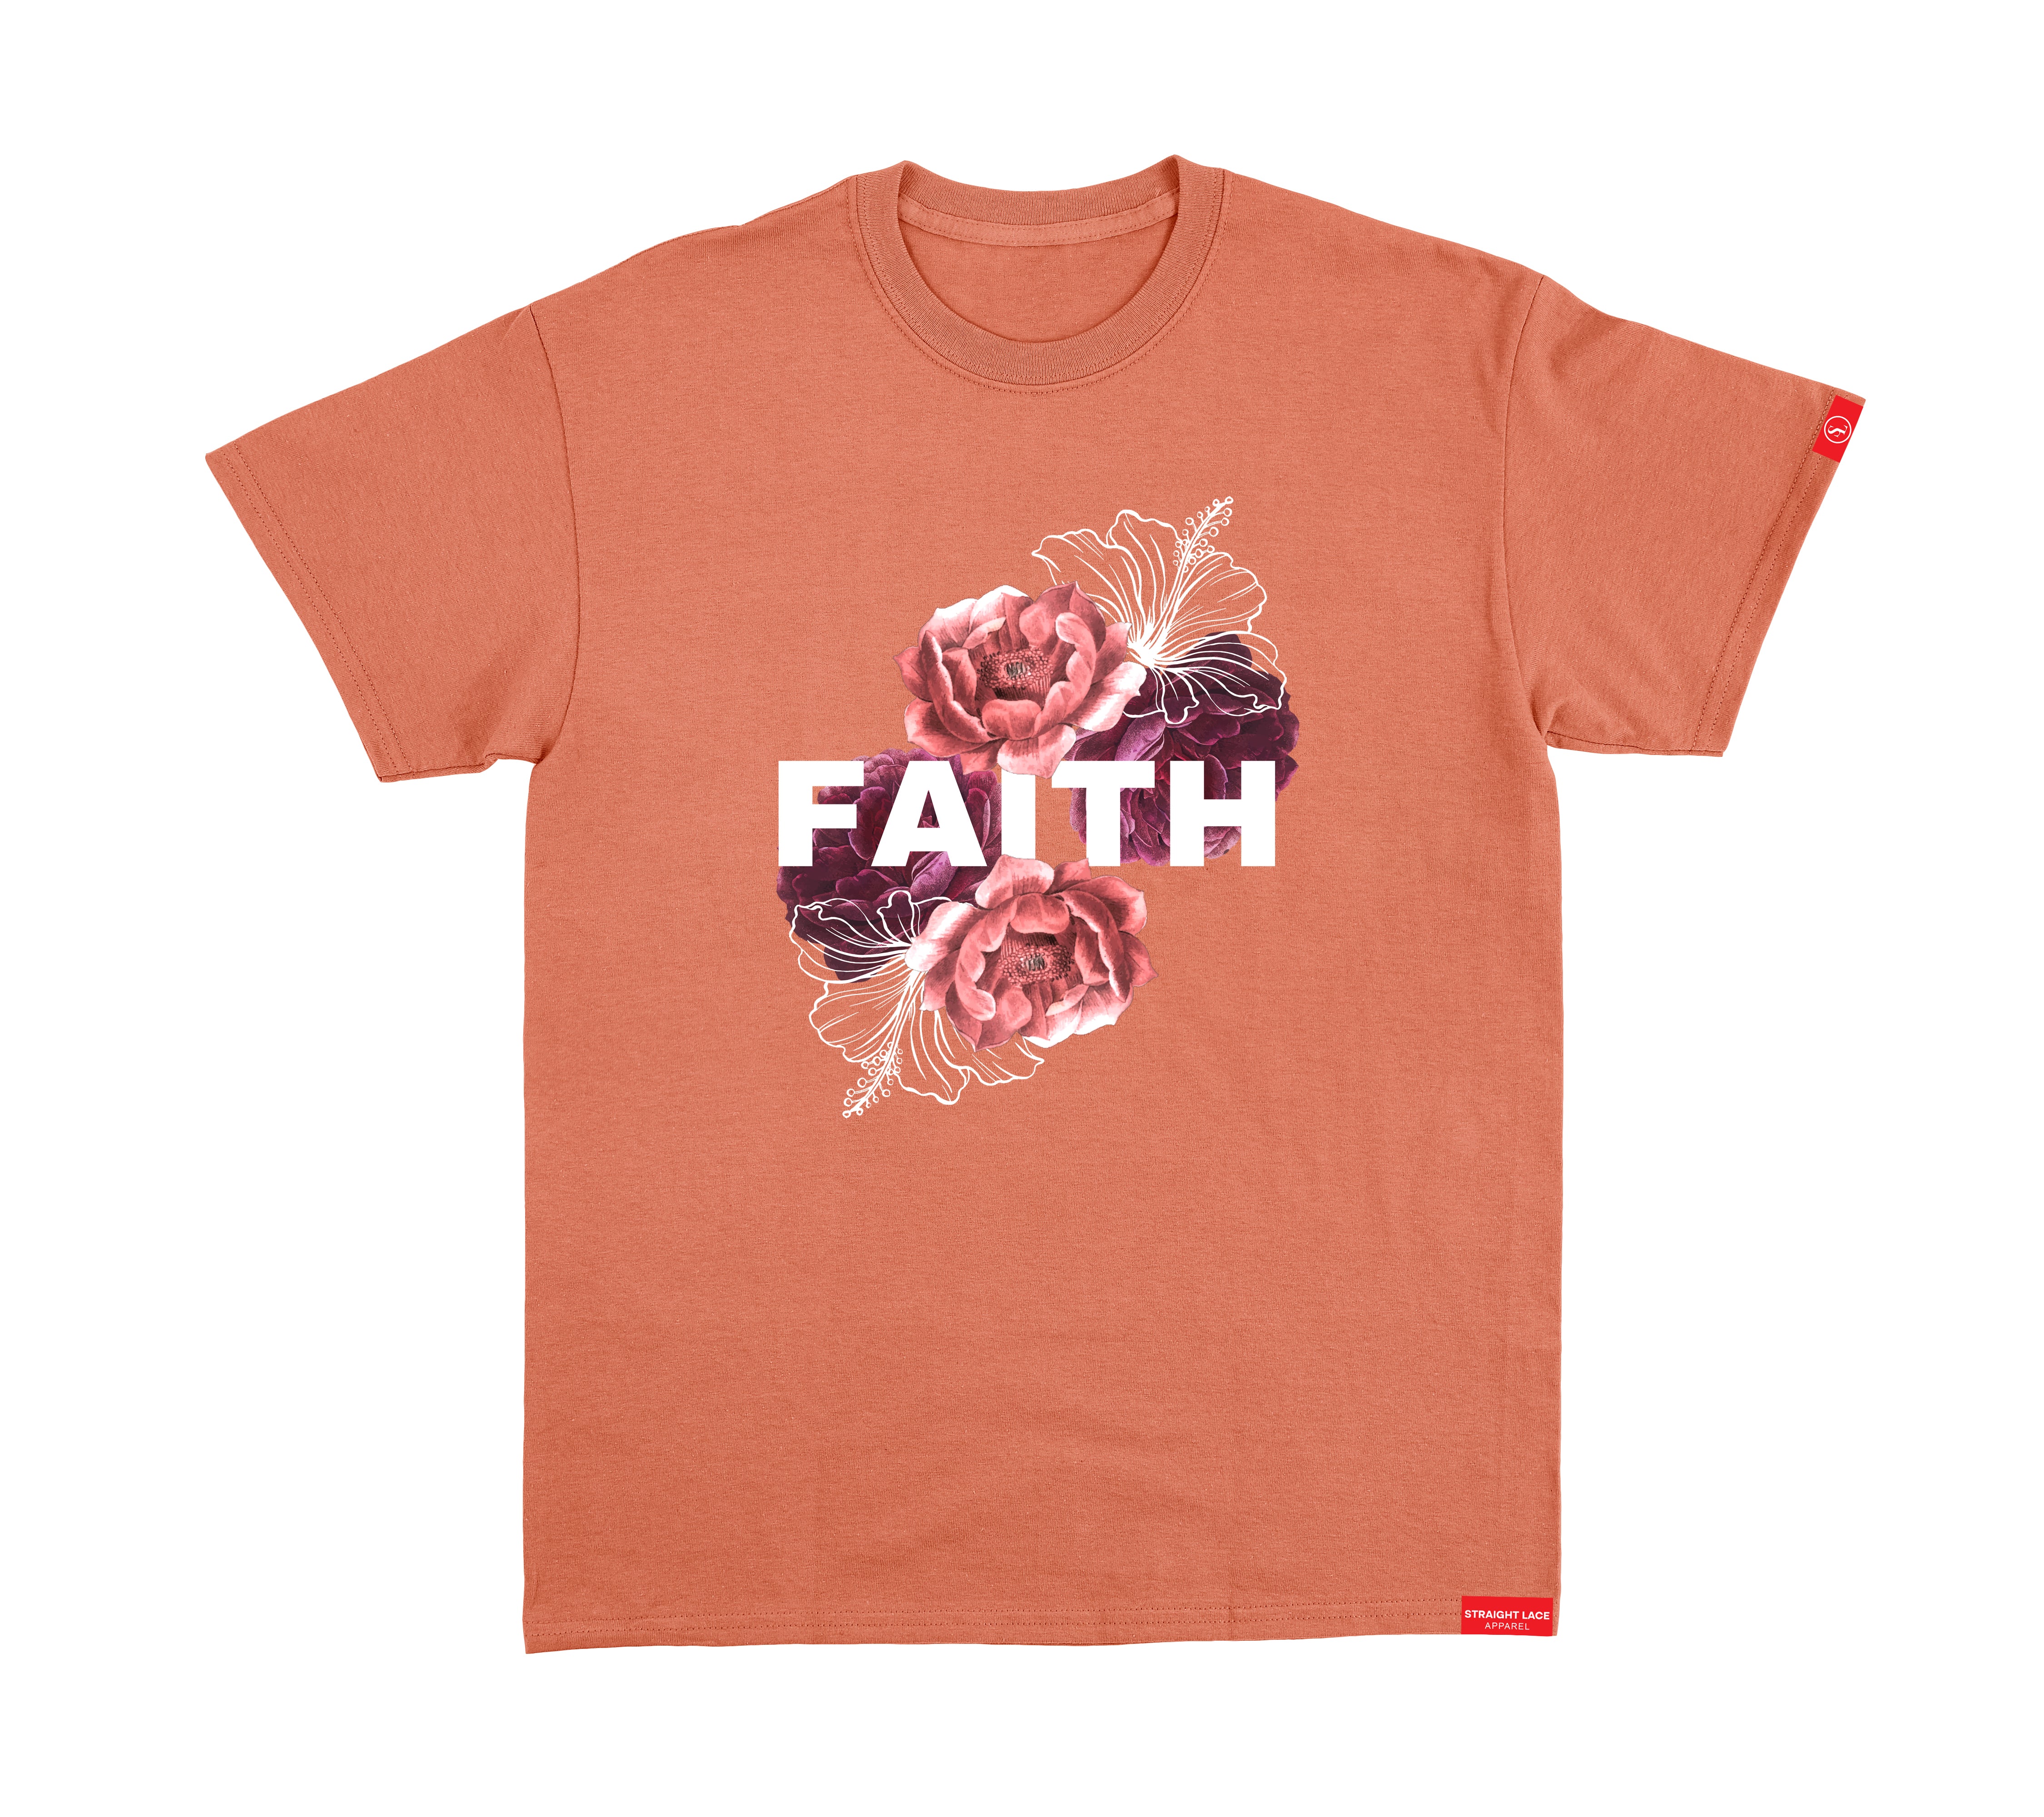 FAITH STRAIGHT LACE T SHIRT (Classic Fit)